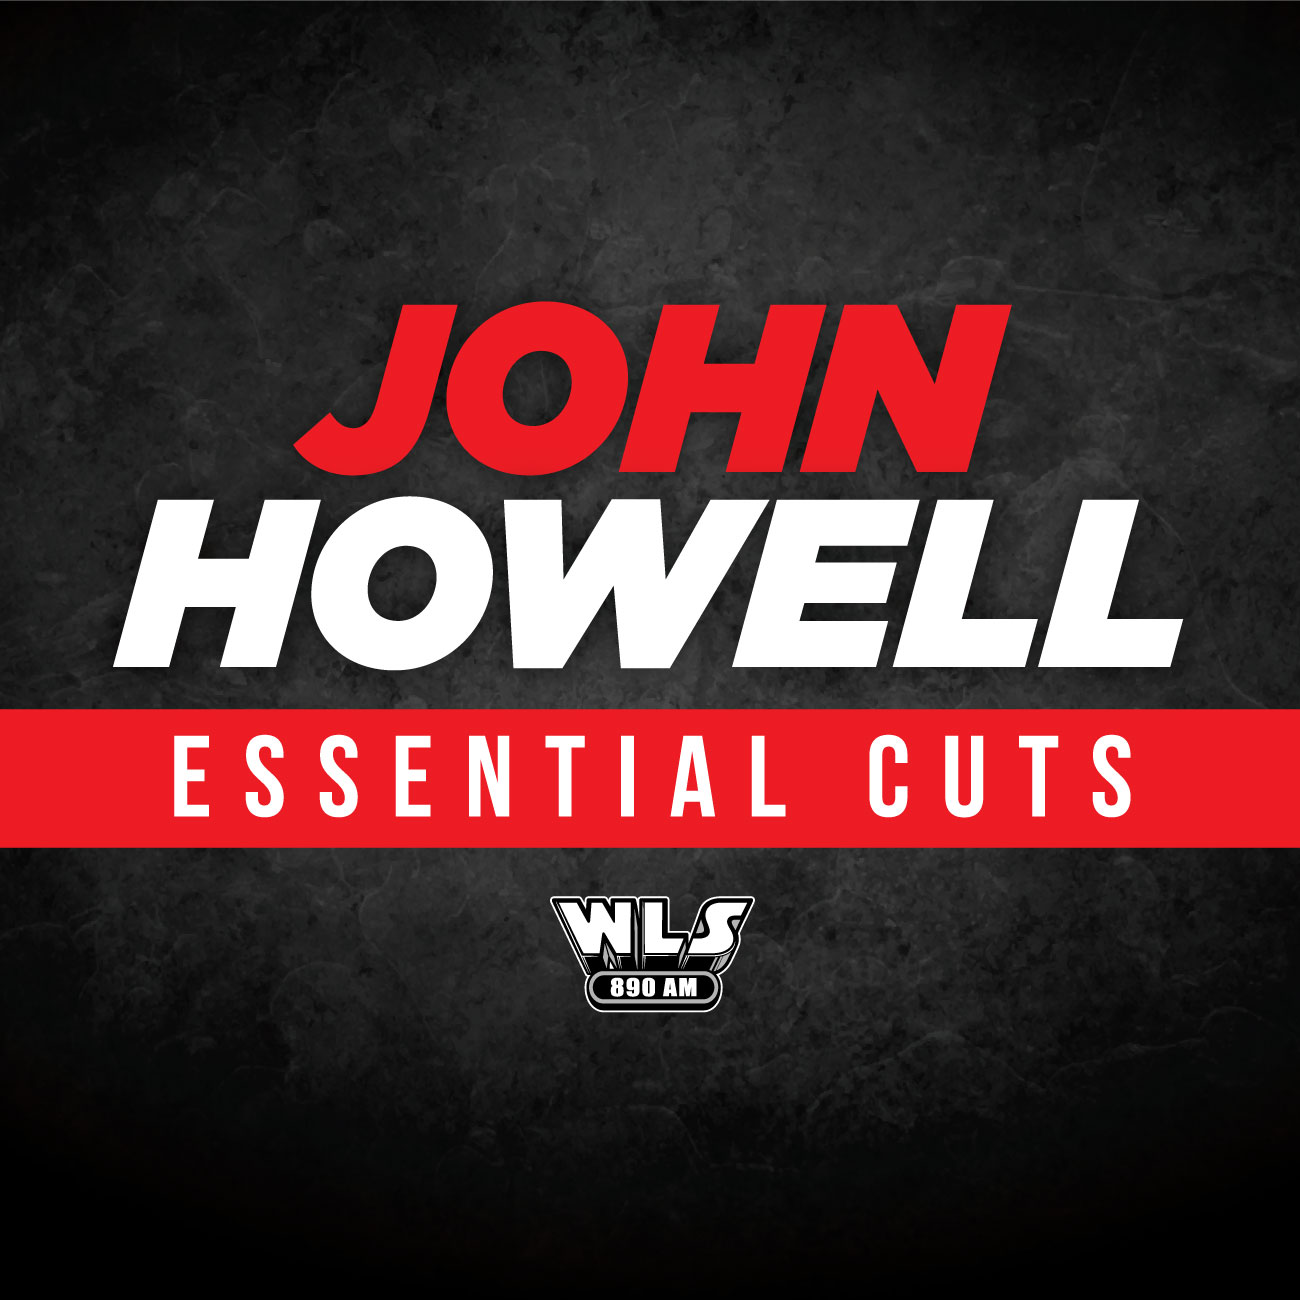 John Howell: Essential Cuts (04/27) - The NFL Draft Begins & The GOP Plan to Combat Crime